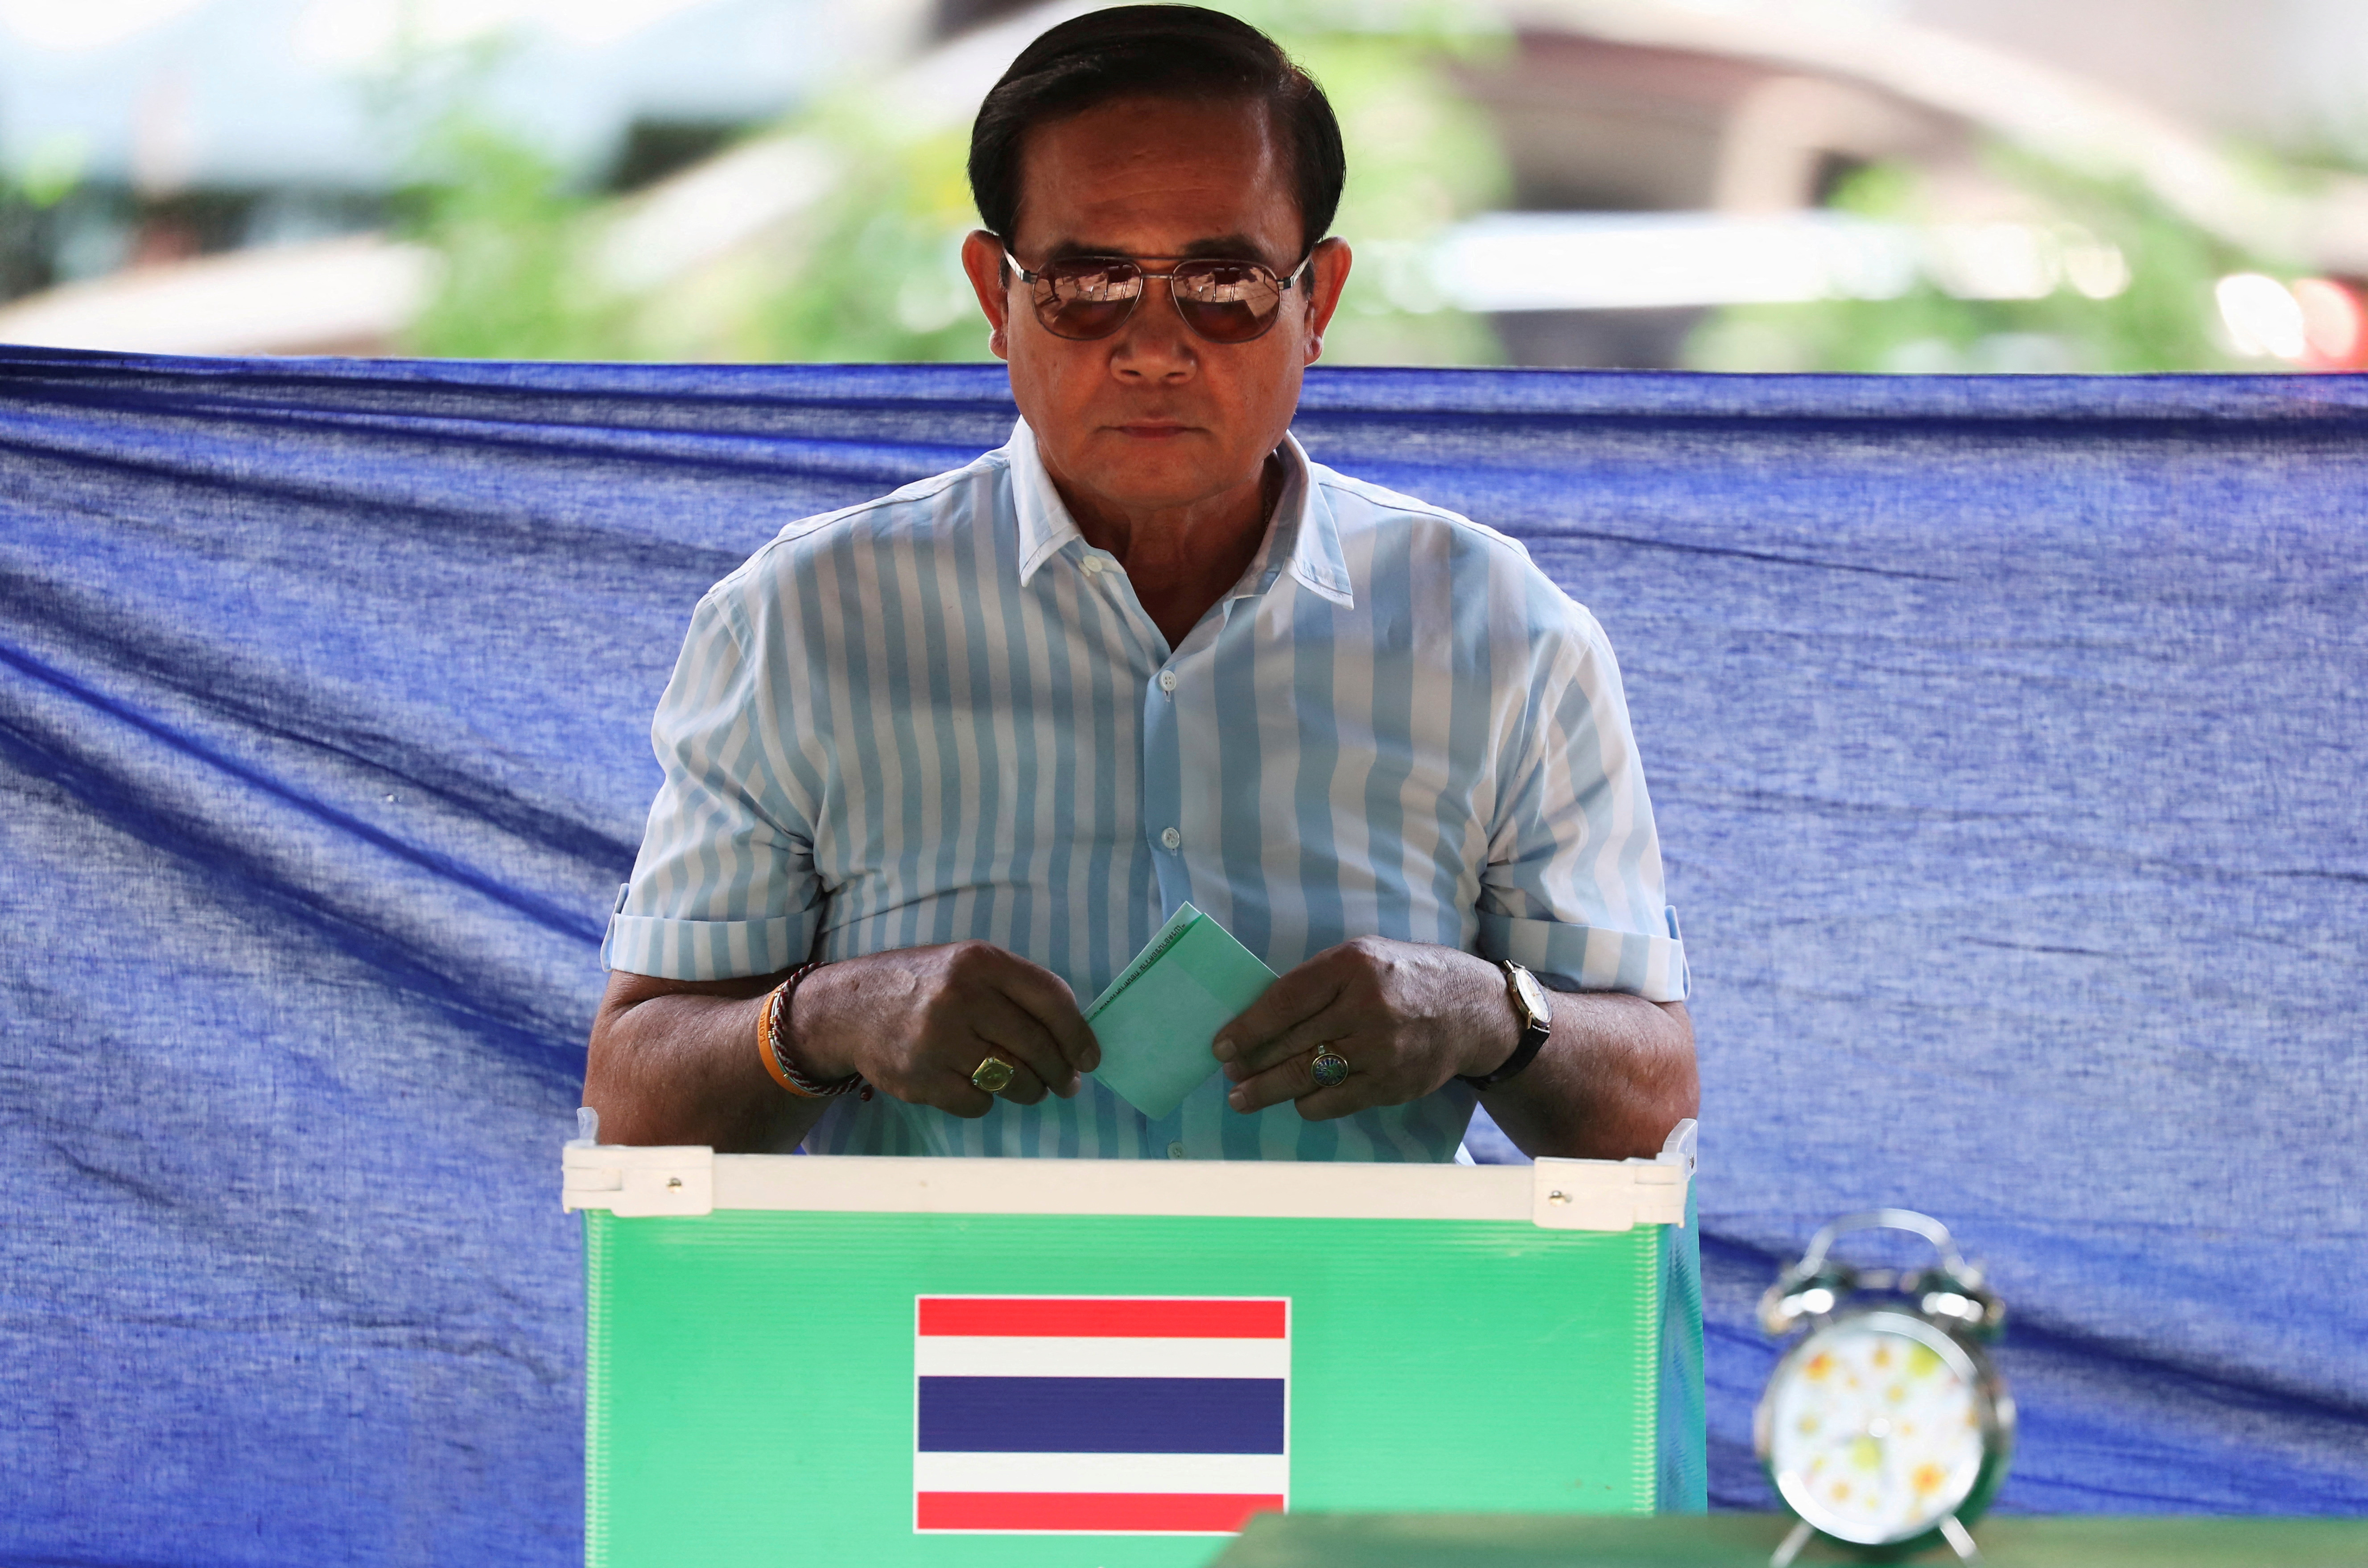 Thailand's Prime Minister Prayuth Chan-ocha casts his ballot to vote in the general election at a polling station in Bangkok